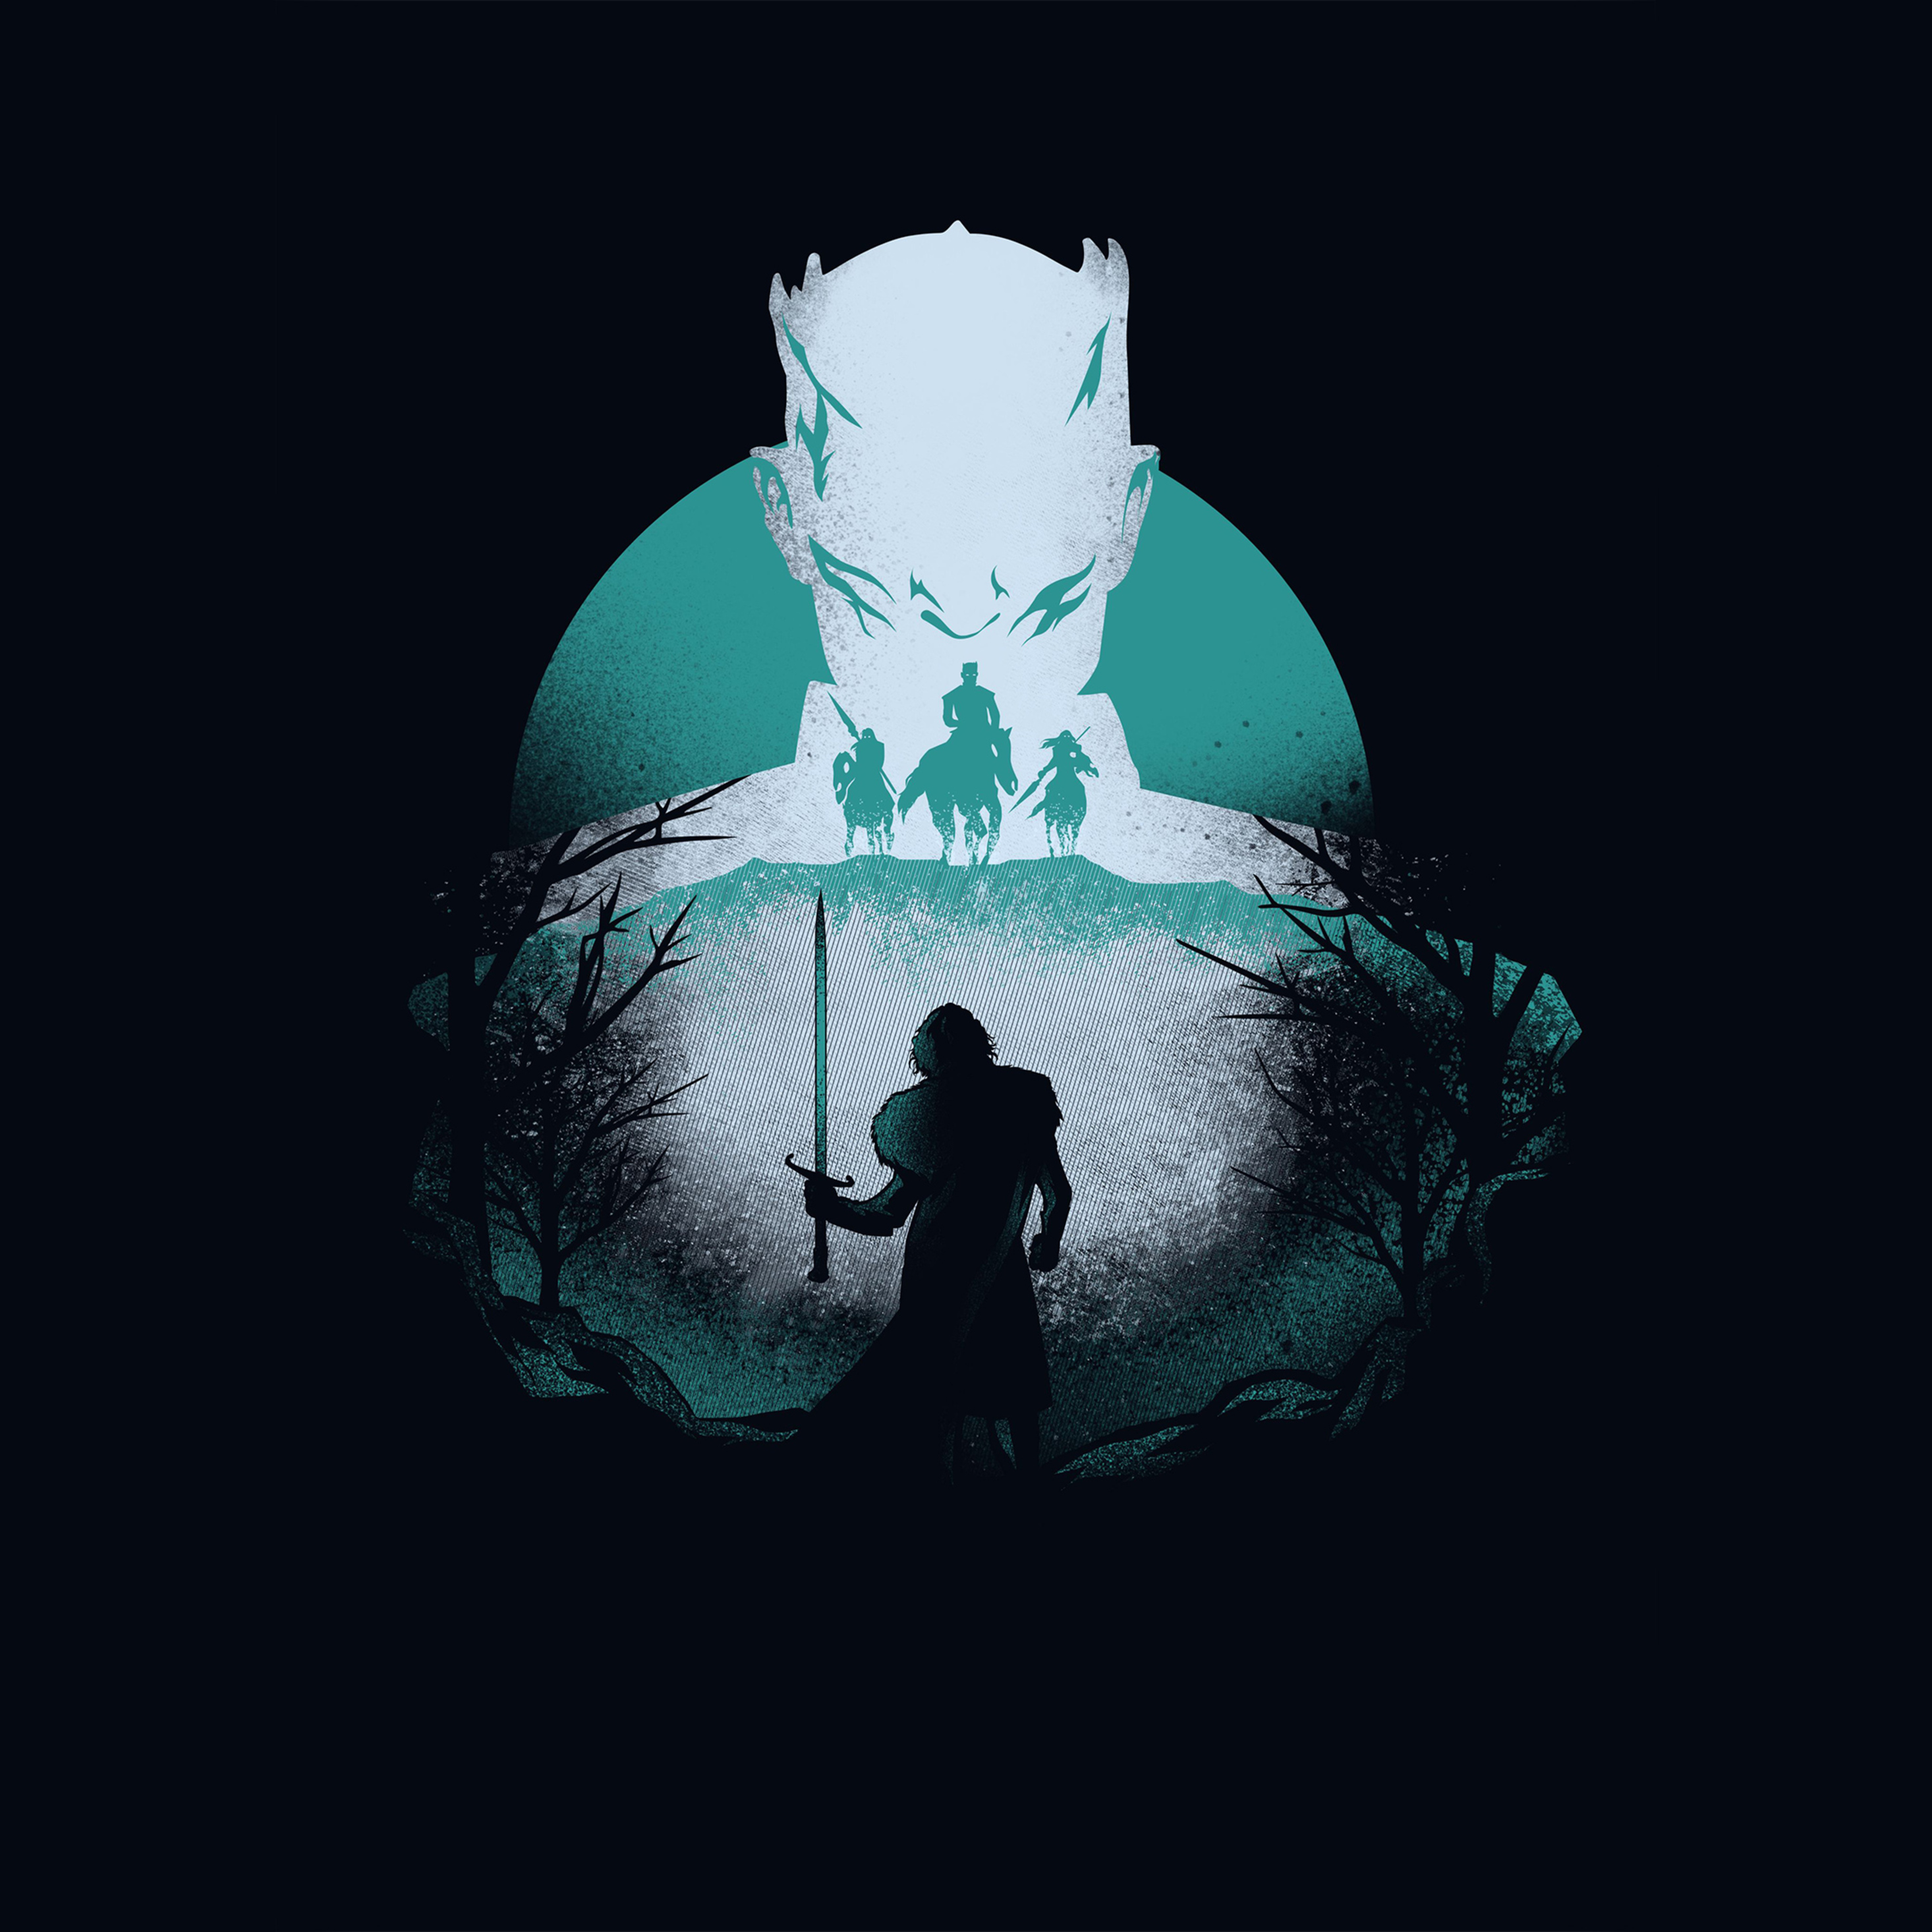 Game Of Thrones 4k Wallpaper Android - 2048x2048 Wallpaper 